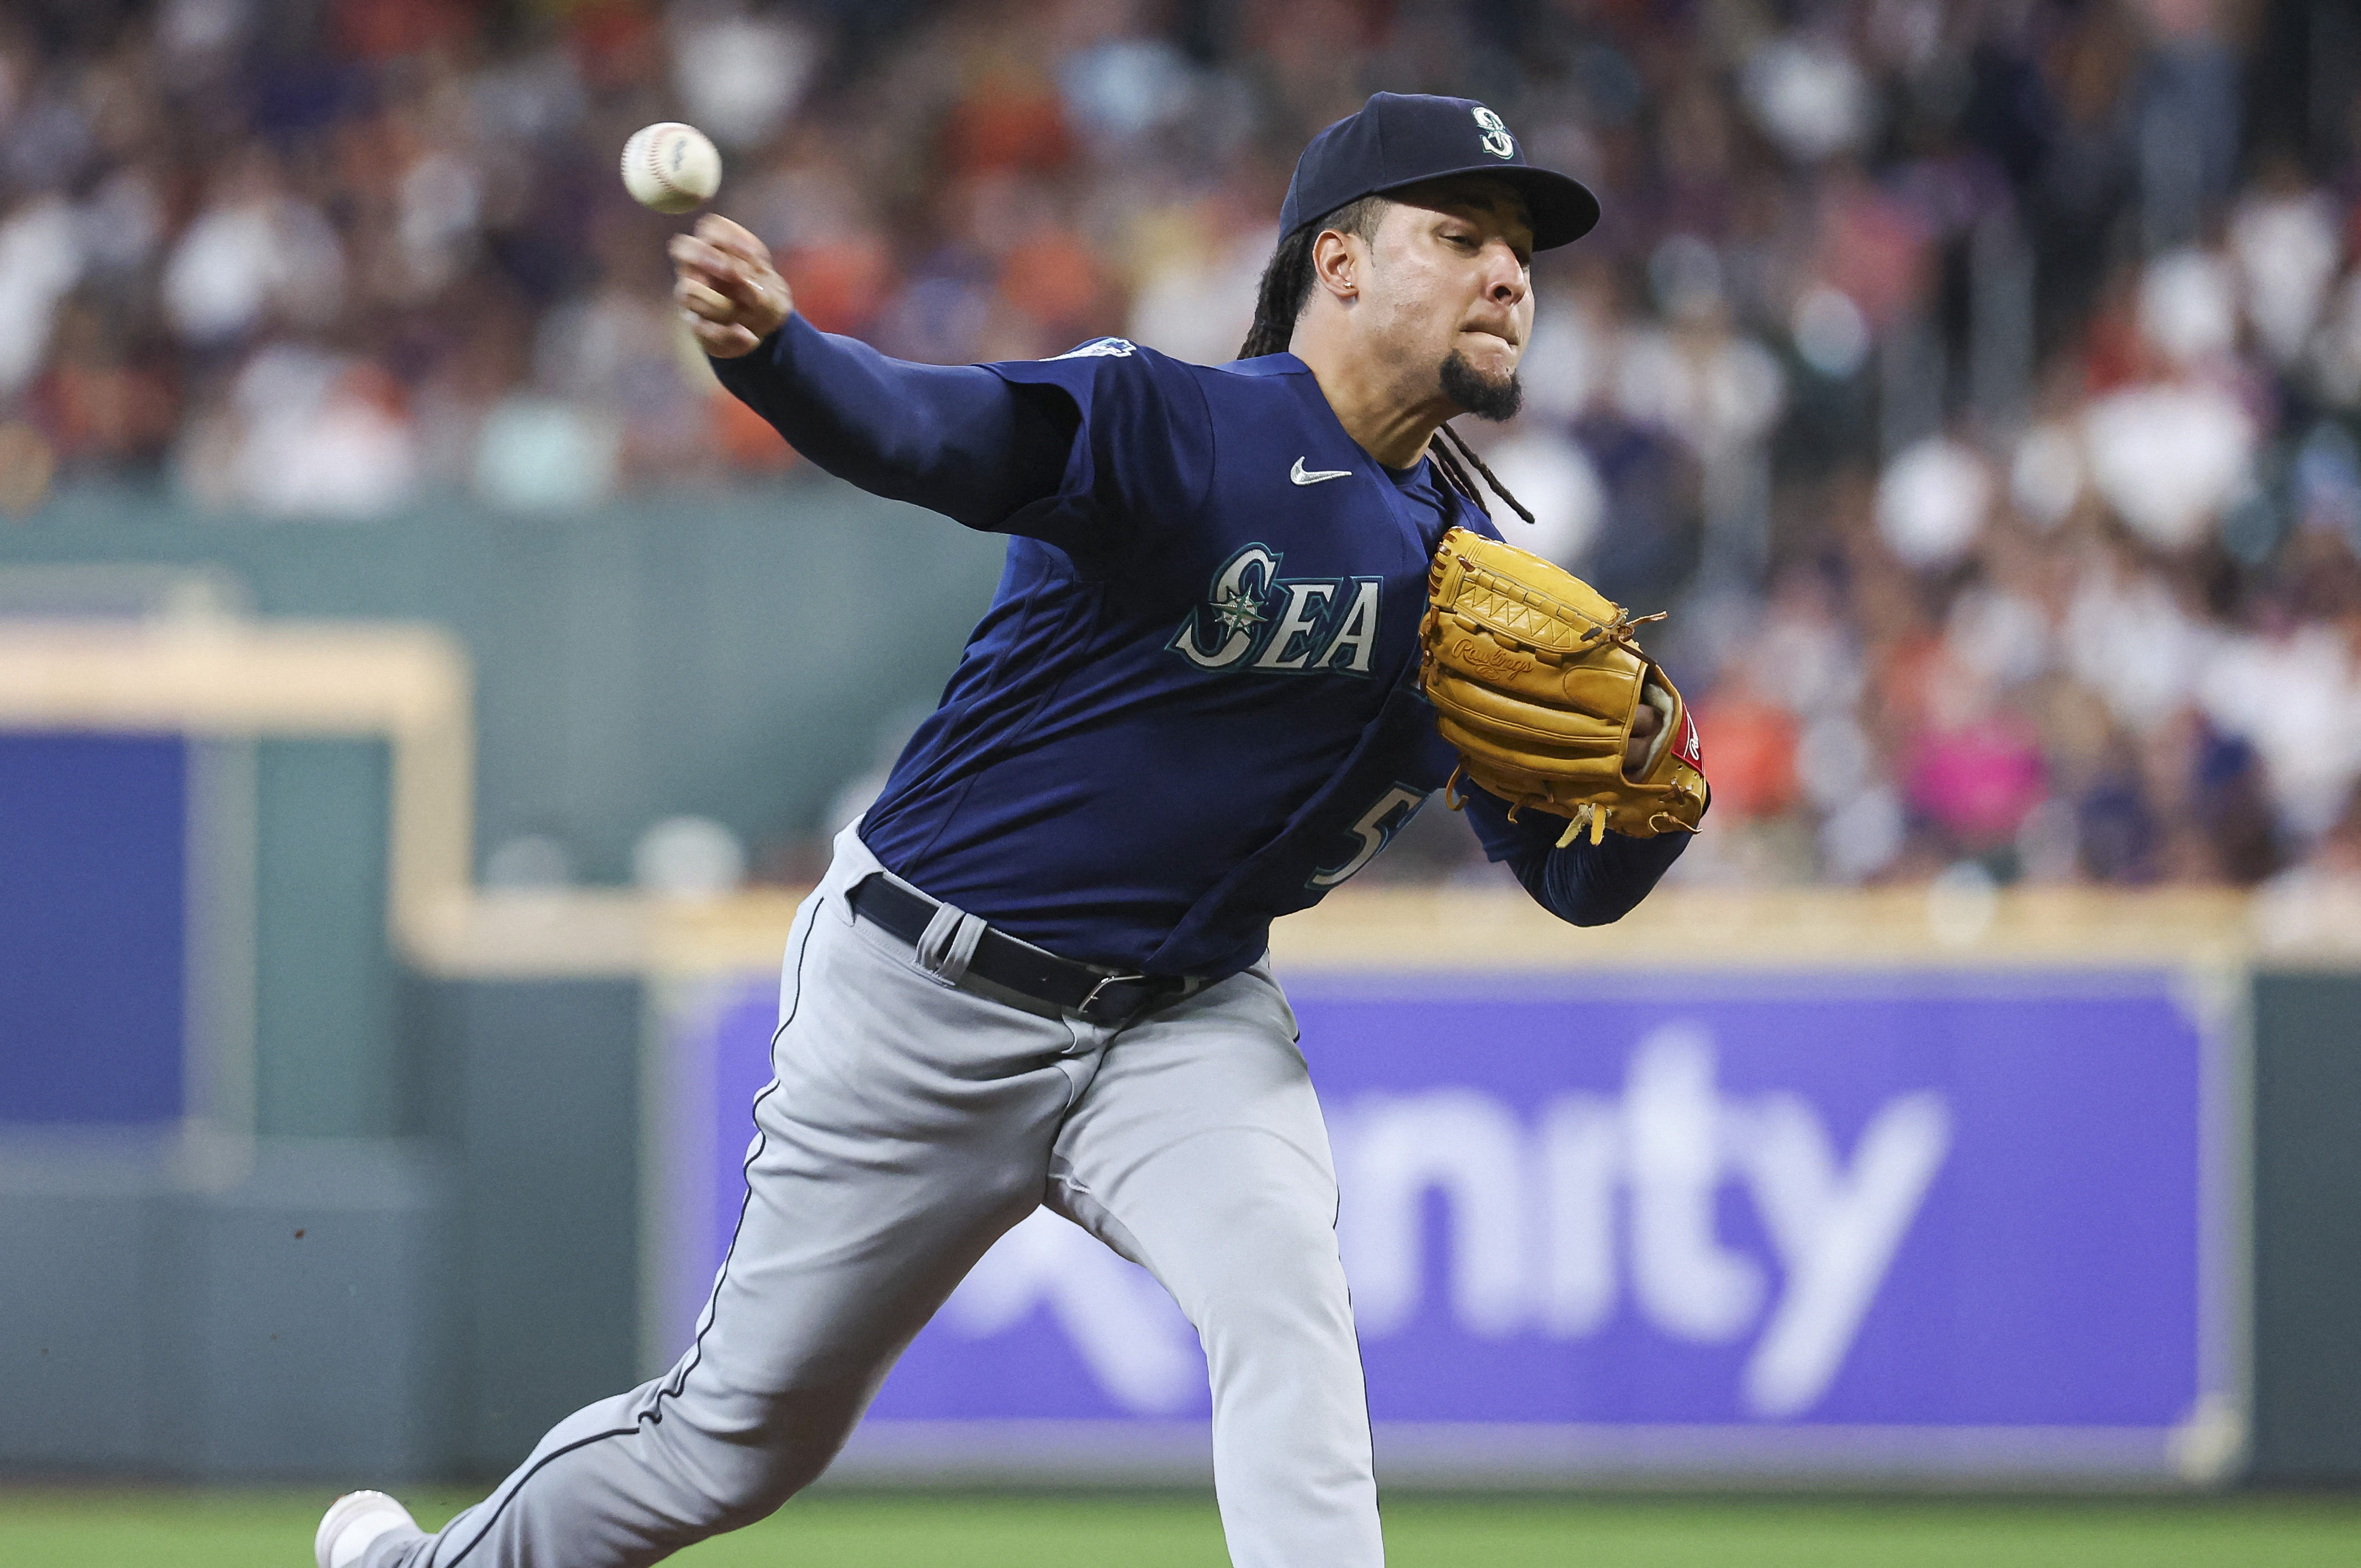 Luis Castillo throws 7 strong innings, Mike Ford clears bases in 9-run 4th,  Mariners pound Astros